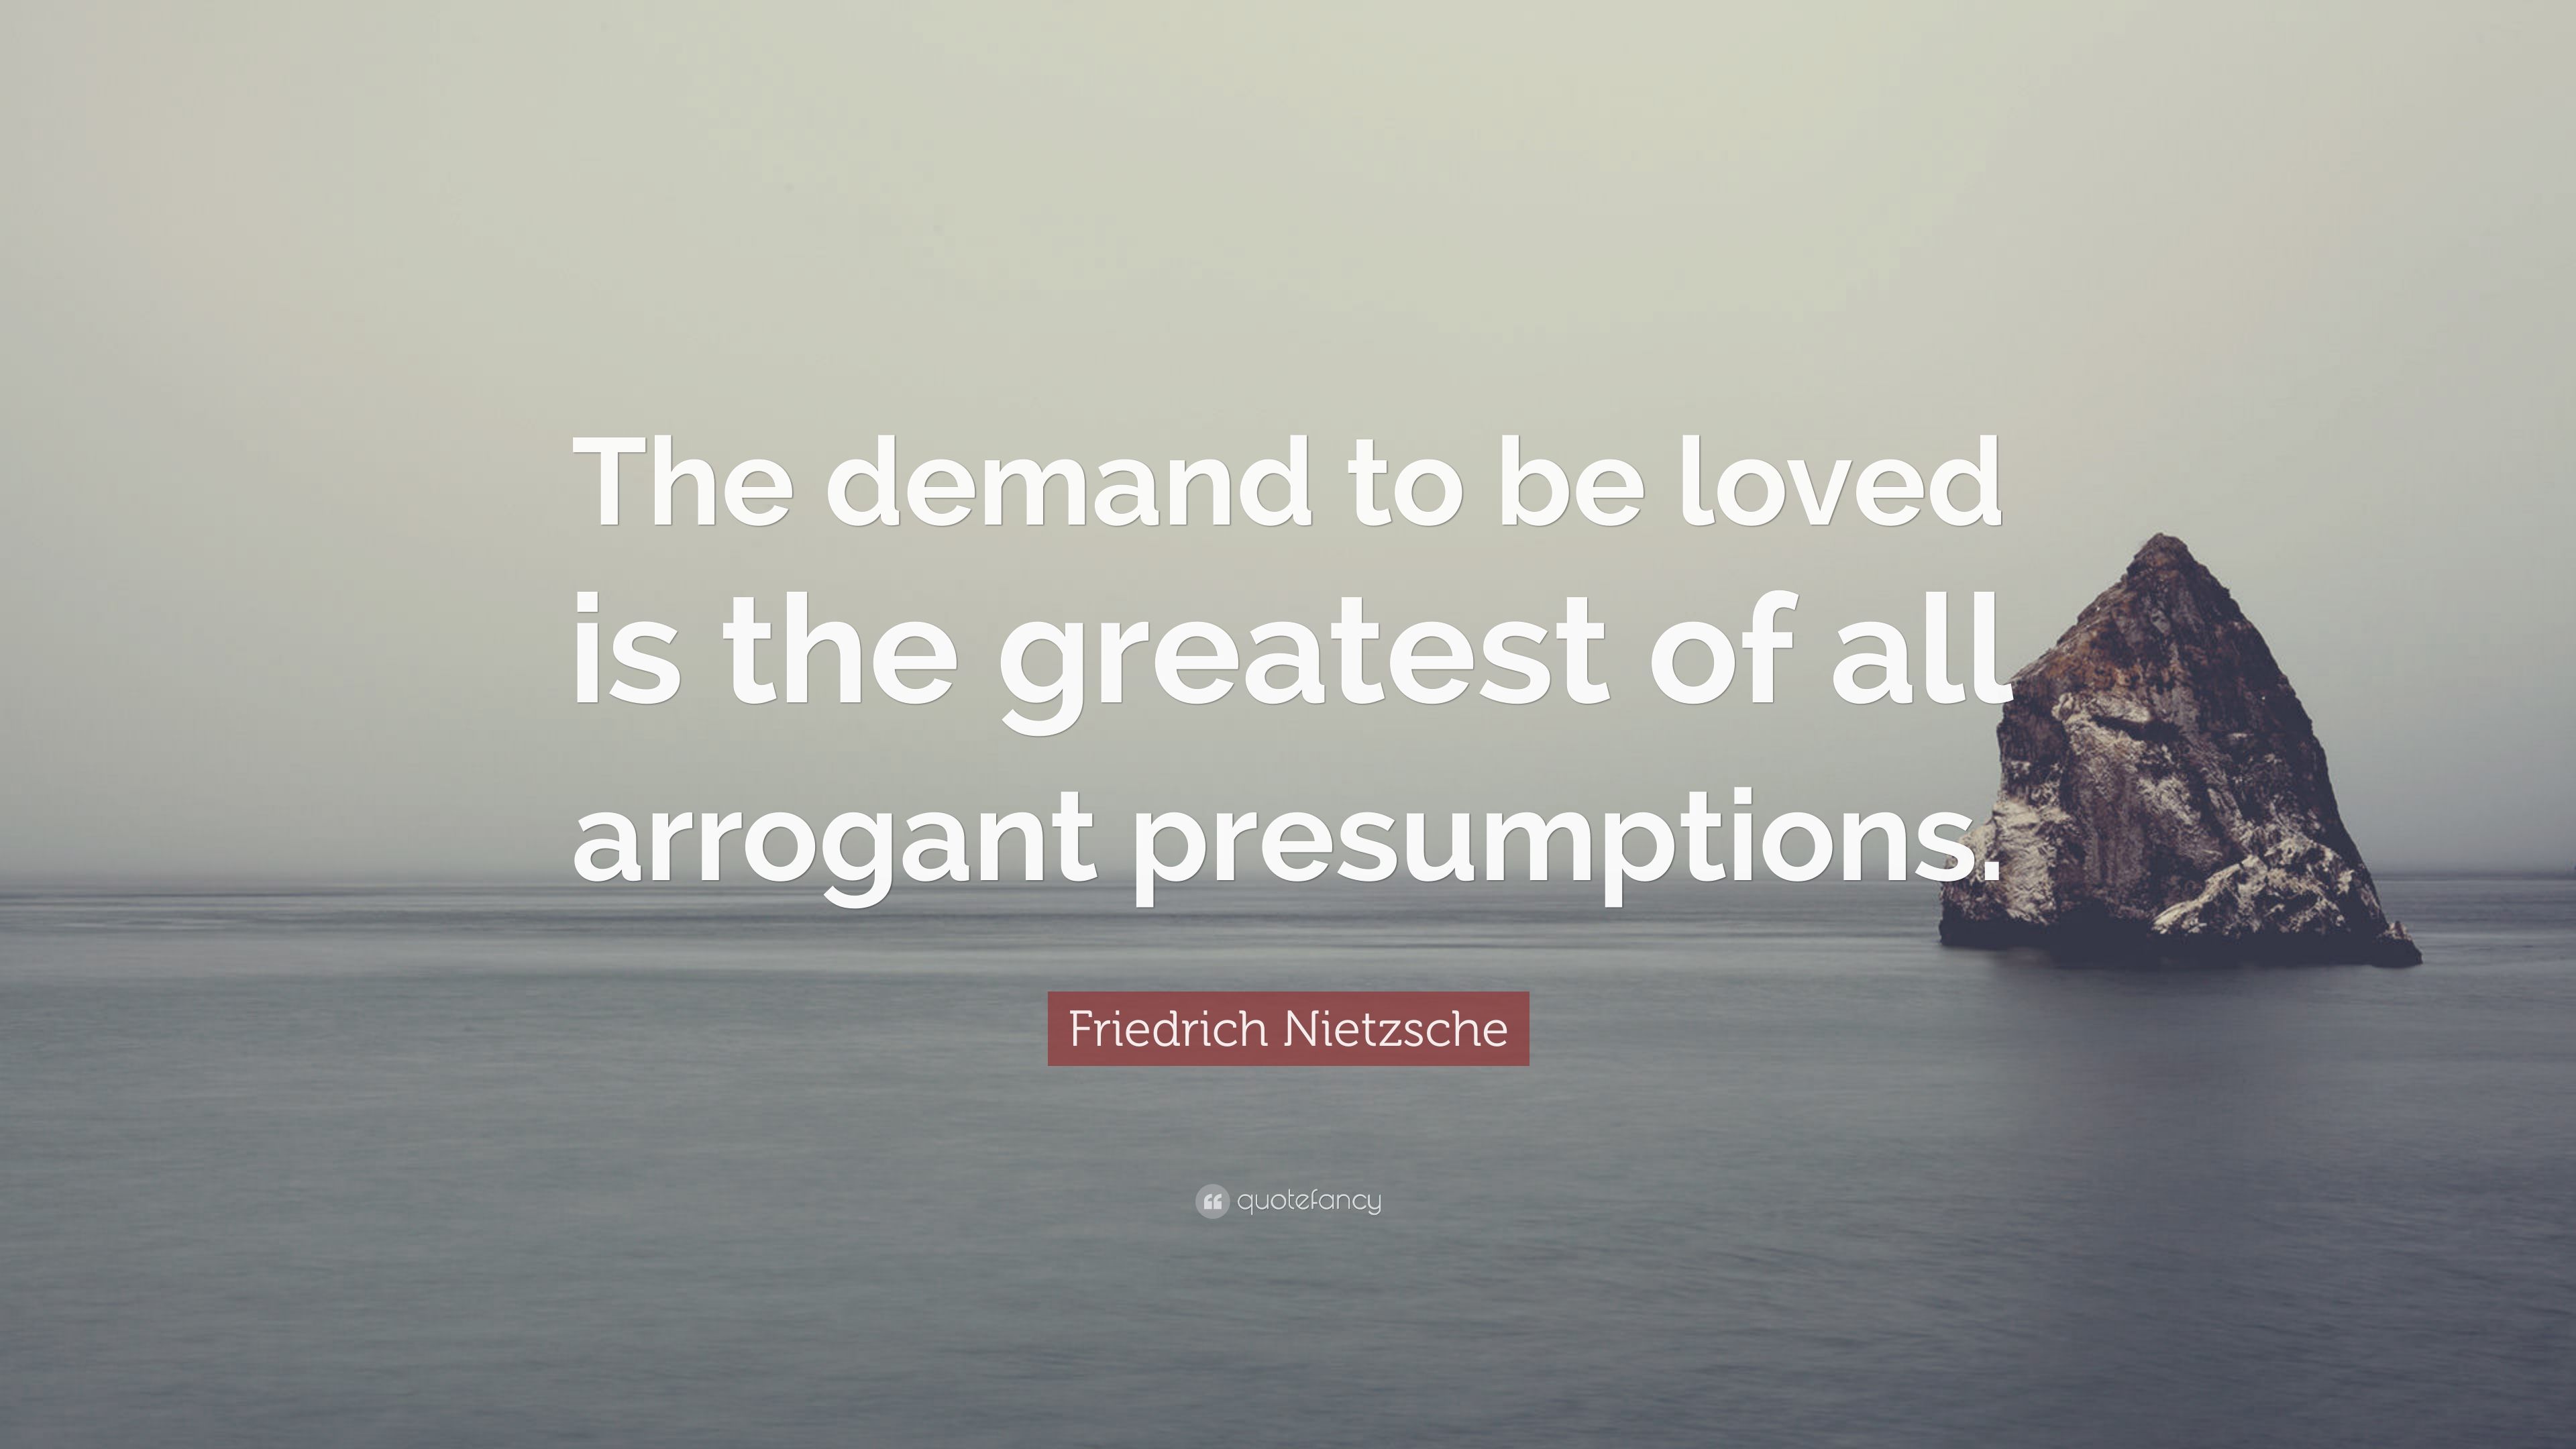 Friedrich Nietzsche Quote: "The demand to be loved is the greatest of ...